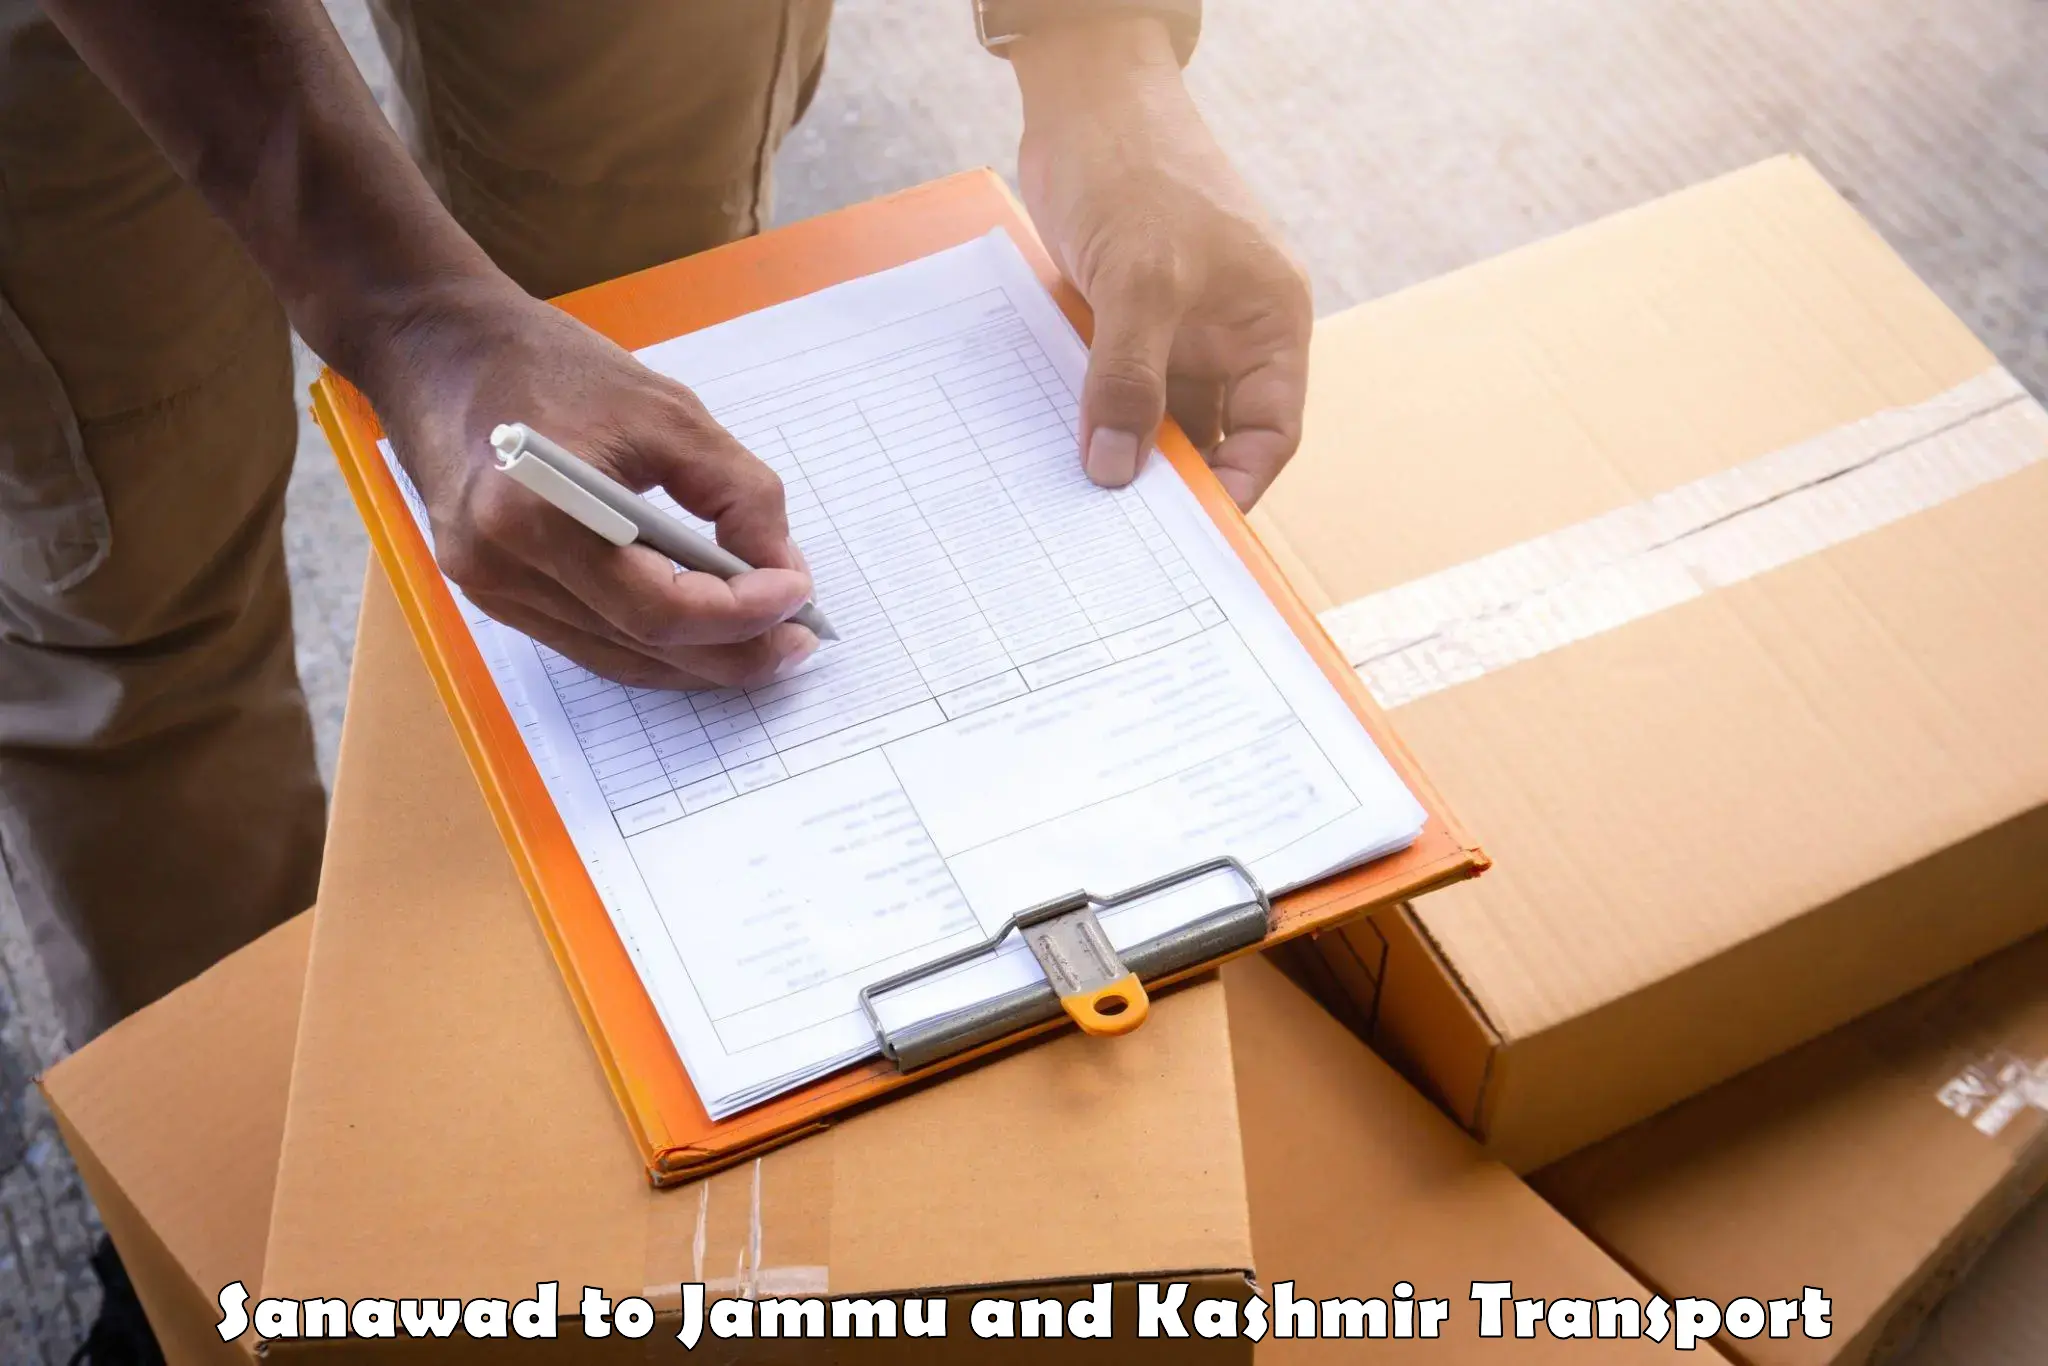 Shipping services Sanawad to Jammu and Kashmir